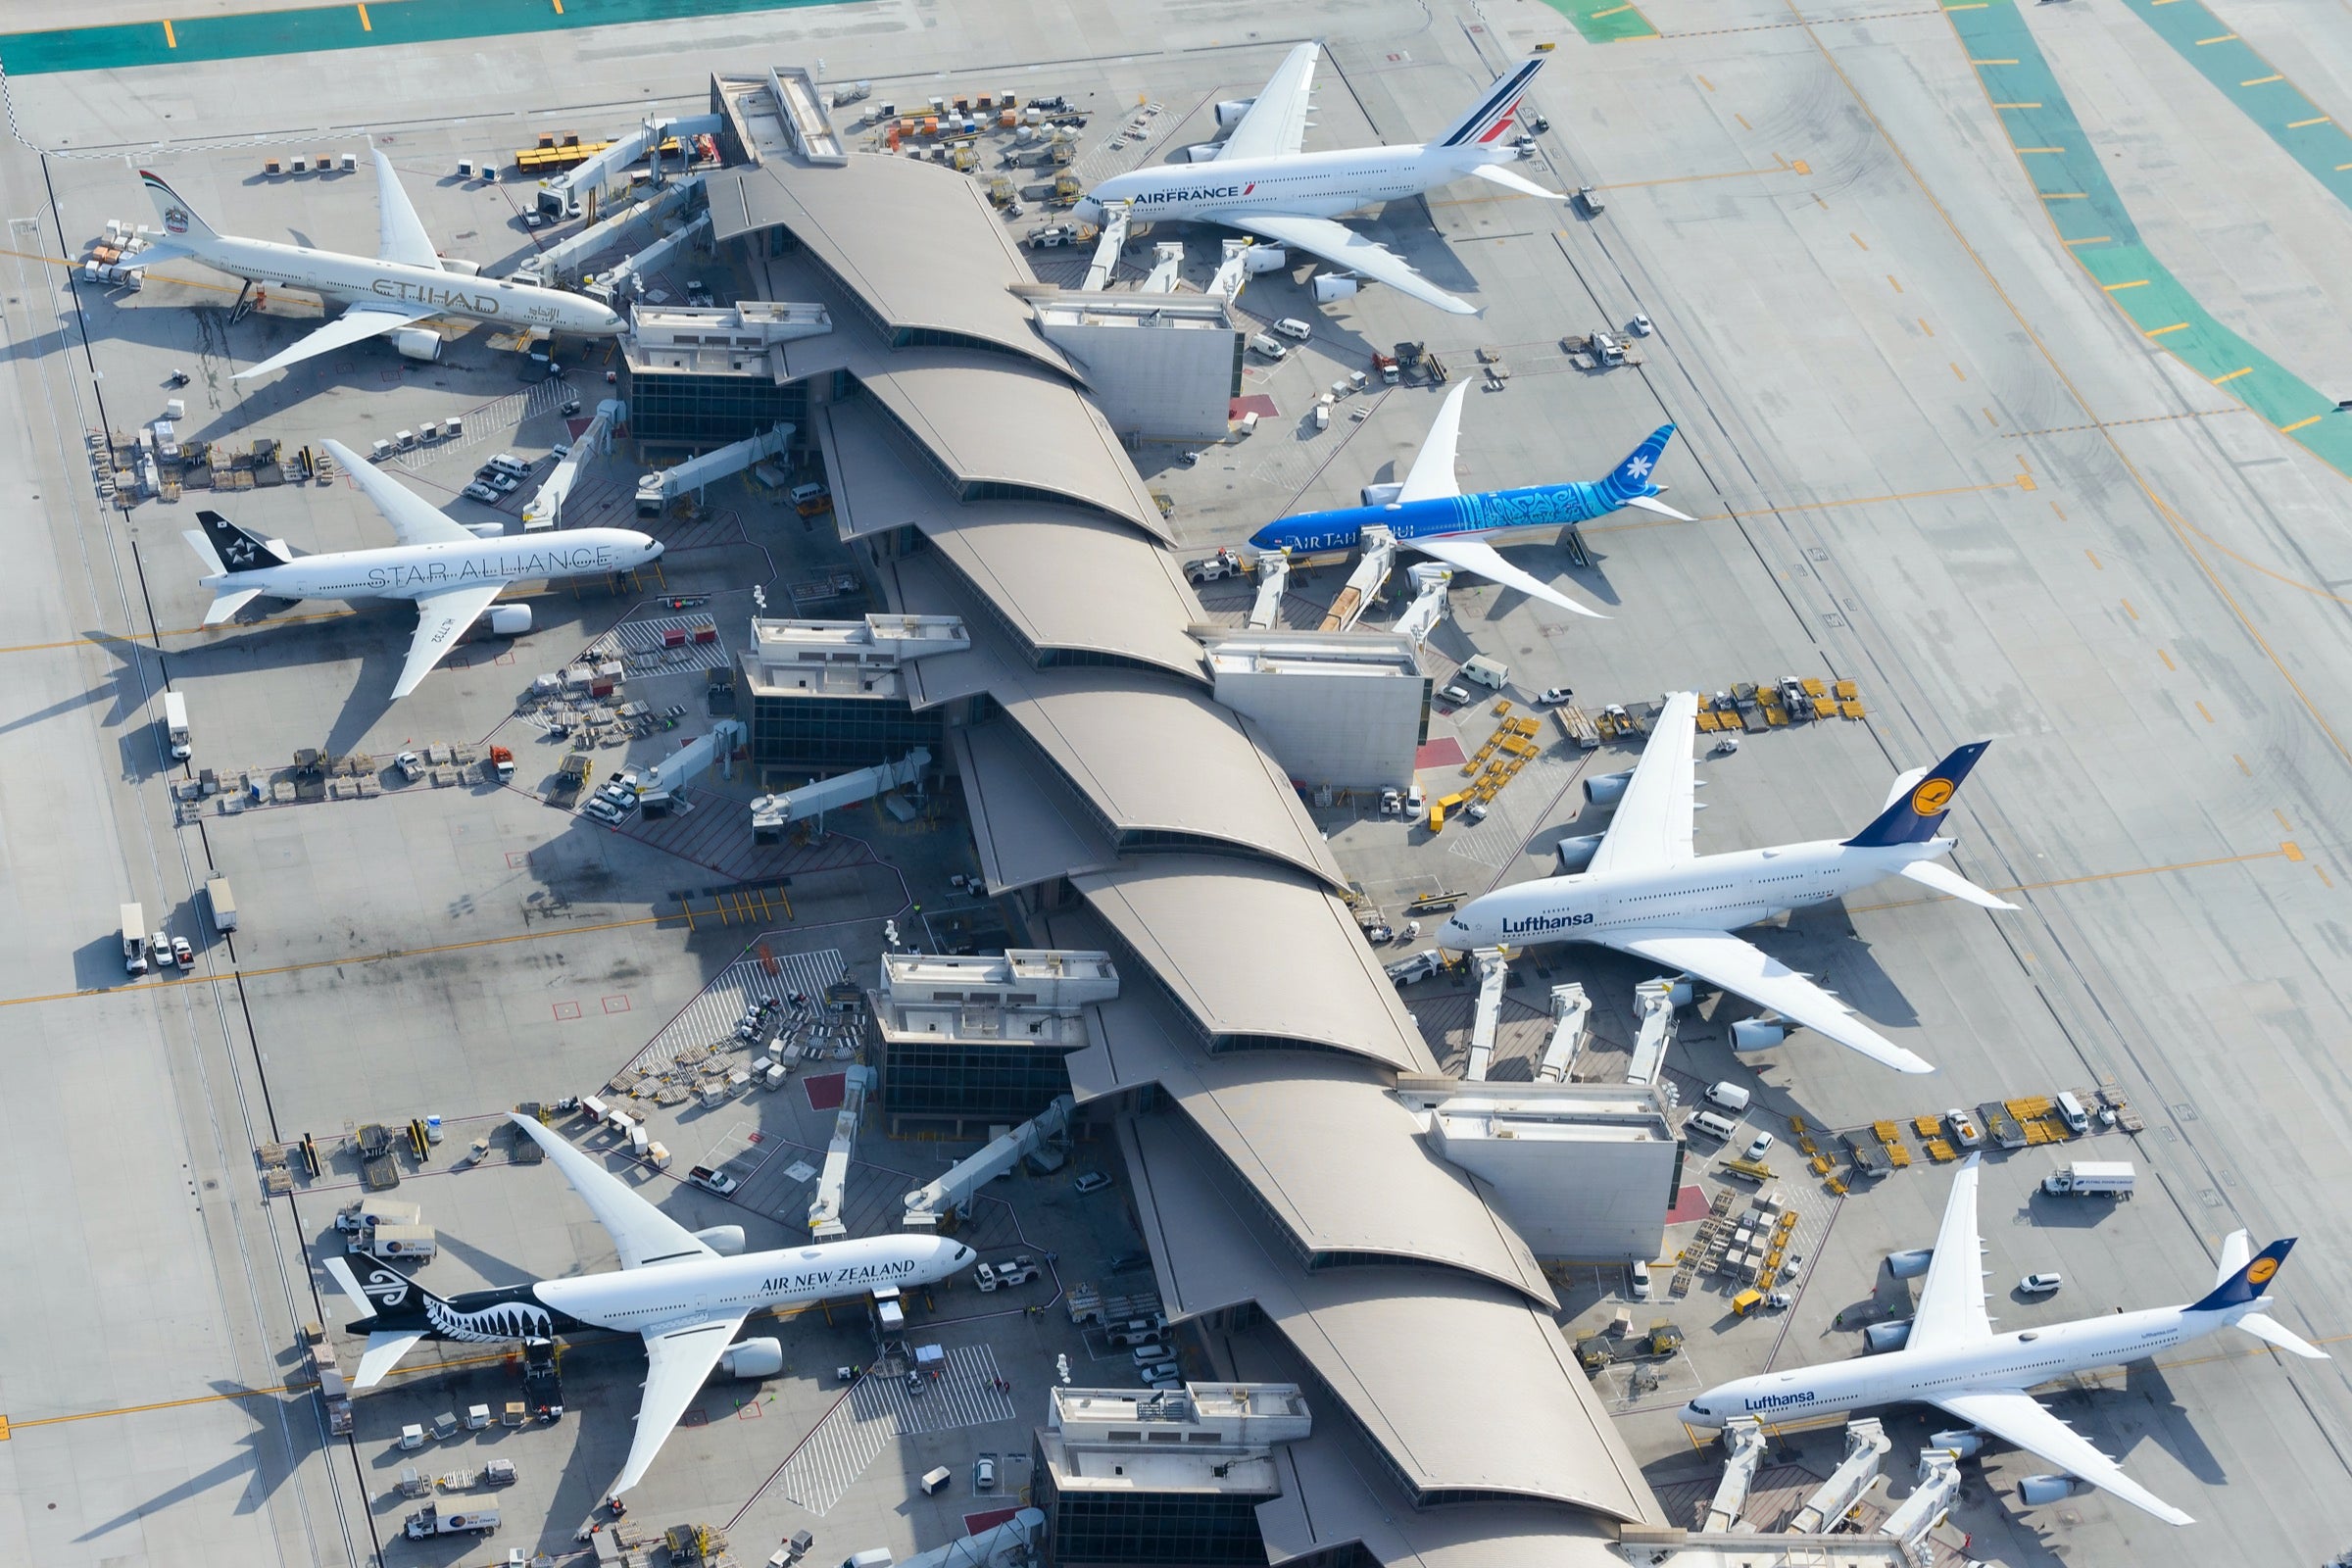 Aerial view of LAX airport with assorted planes